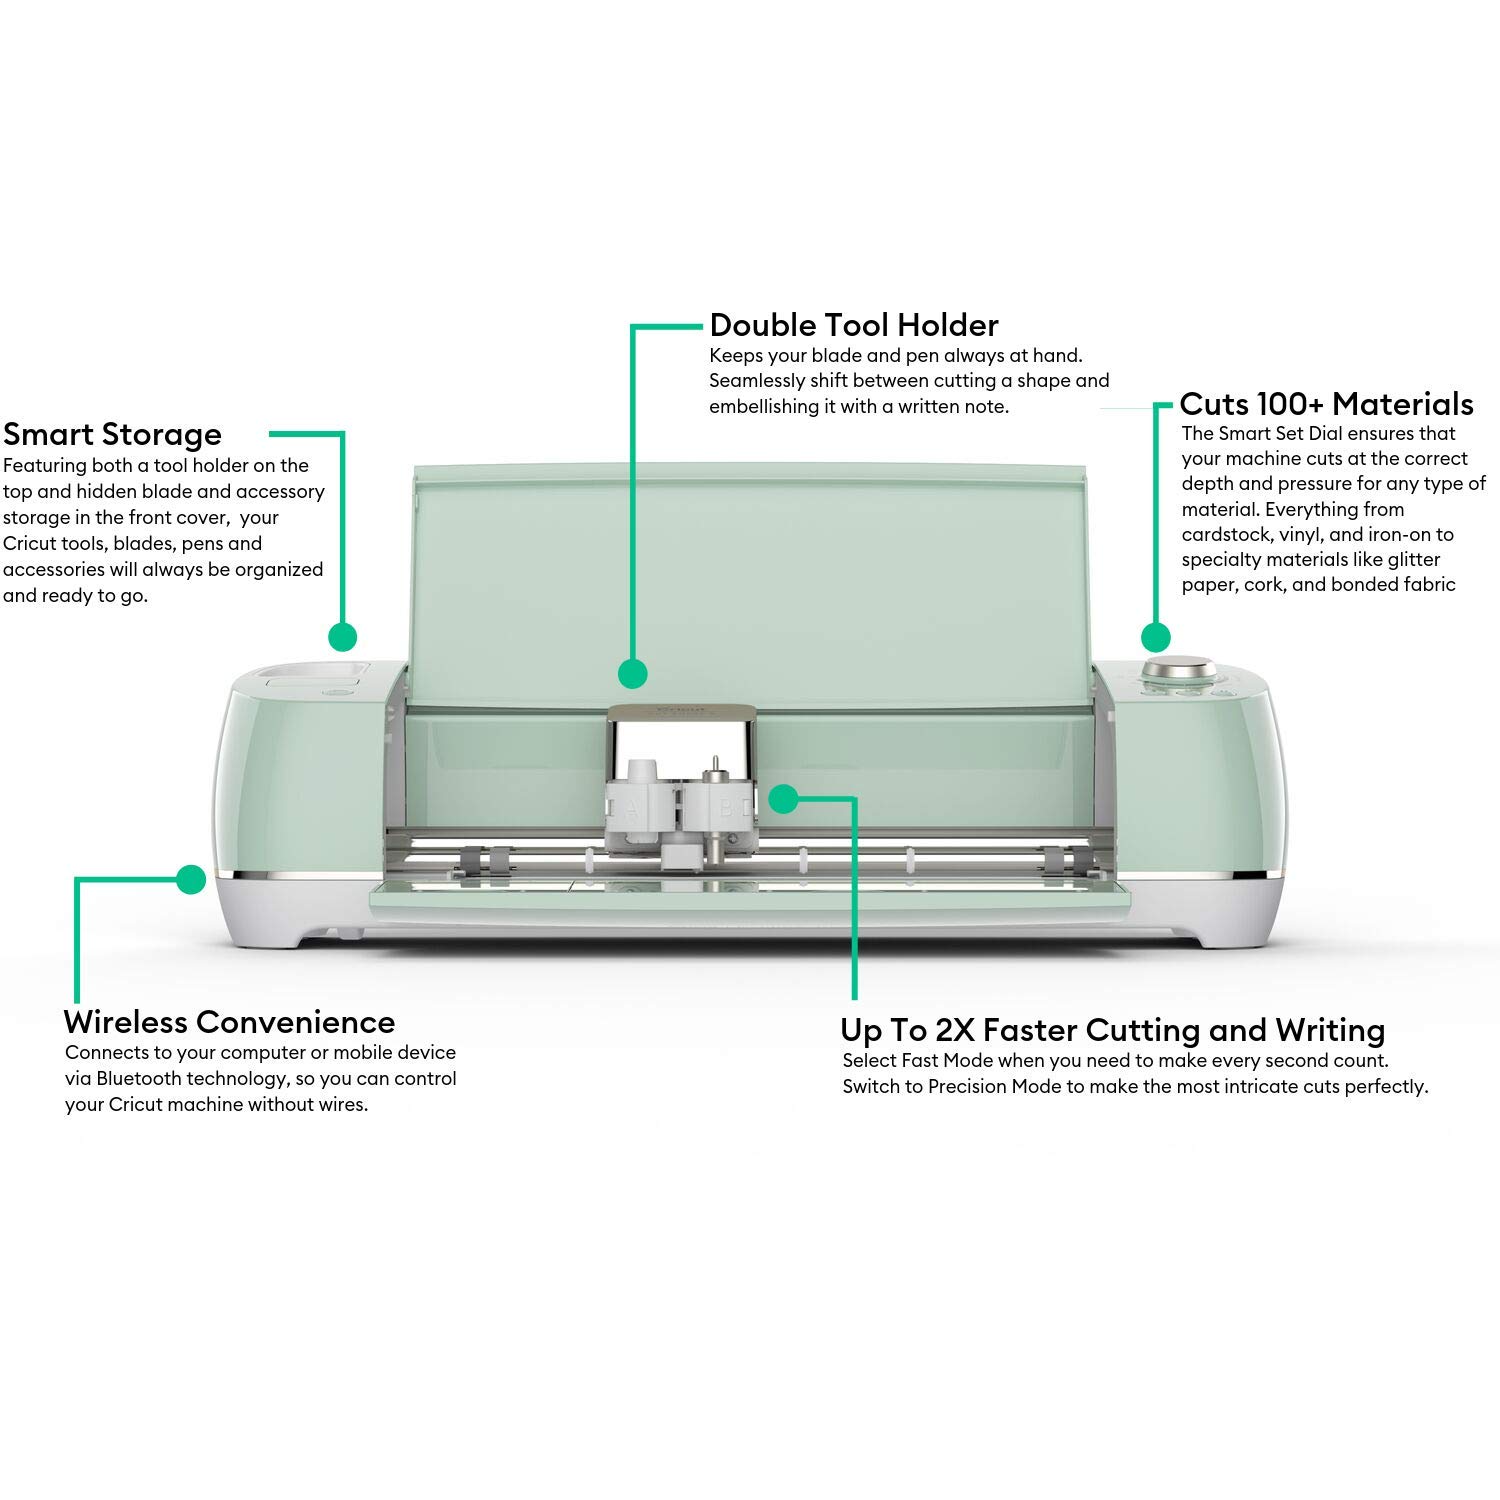 Cricut Explore Air 2 - A DIY Cutting Machine for all Crafts, Create  Customized Cards, Home Decor & More, Bluetooth Connectivity, Compatible  with iOS, Android, Windows & Mac, Blue